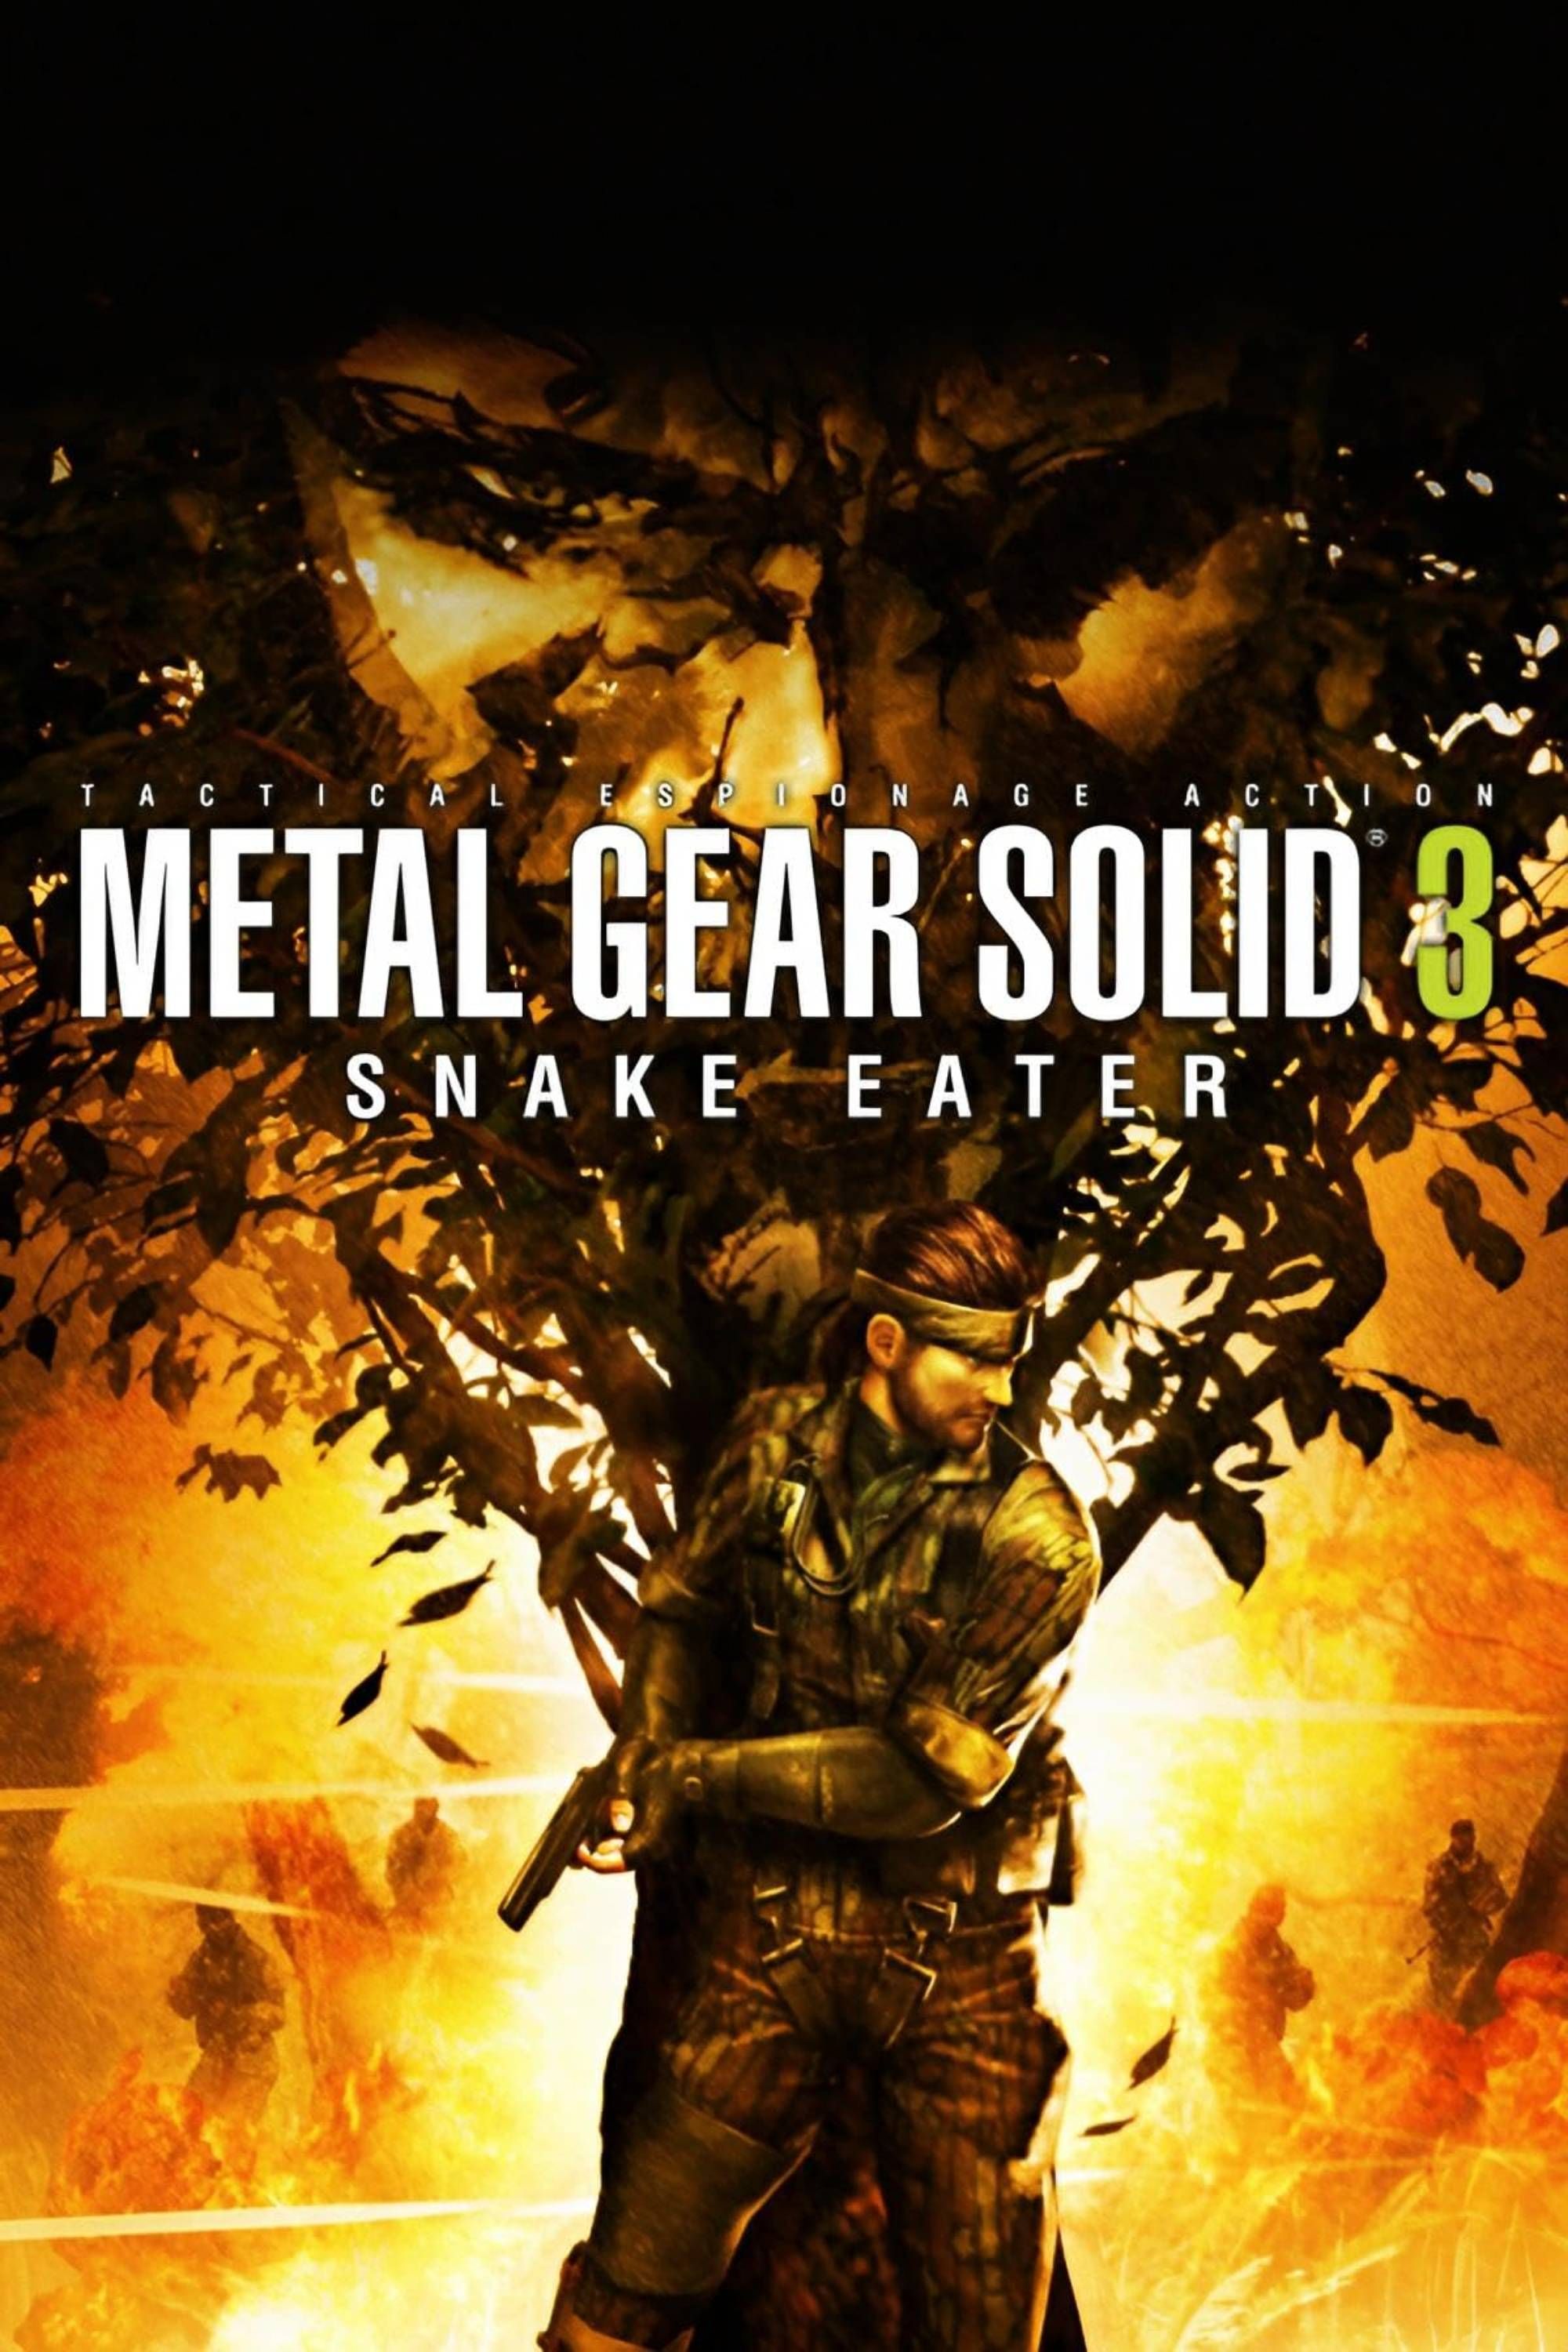 Metal Gear Solid 3 Snake Eater Tag Page Cover Art